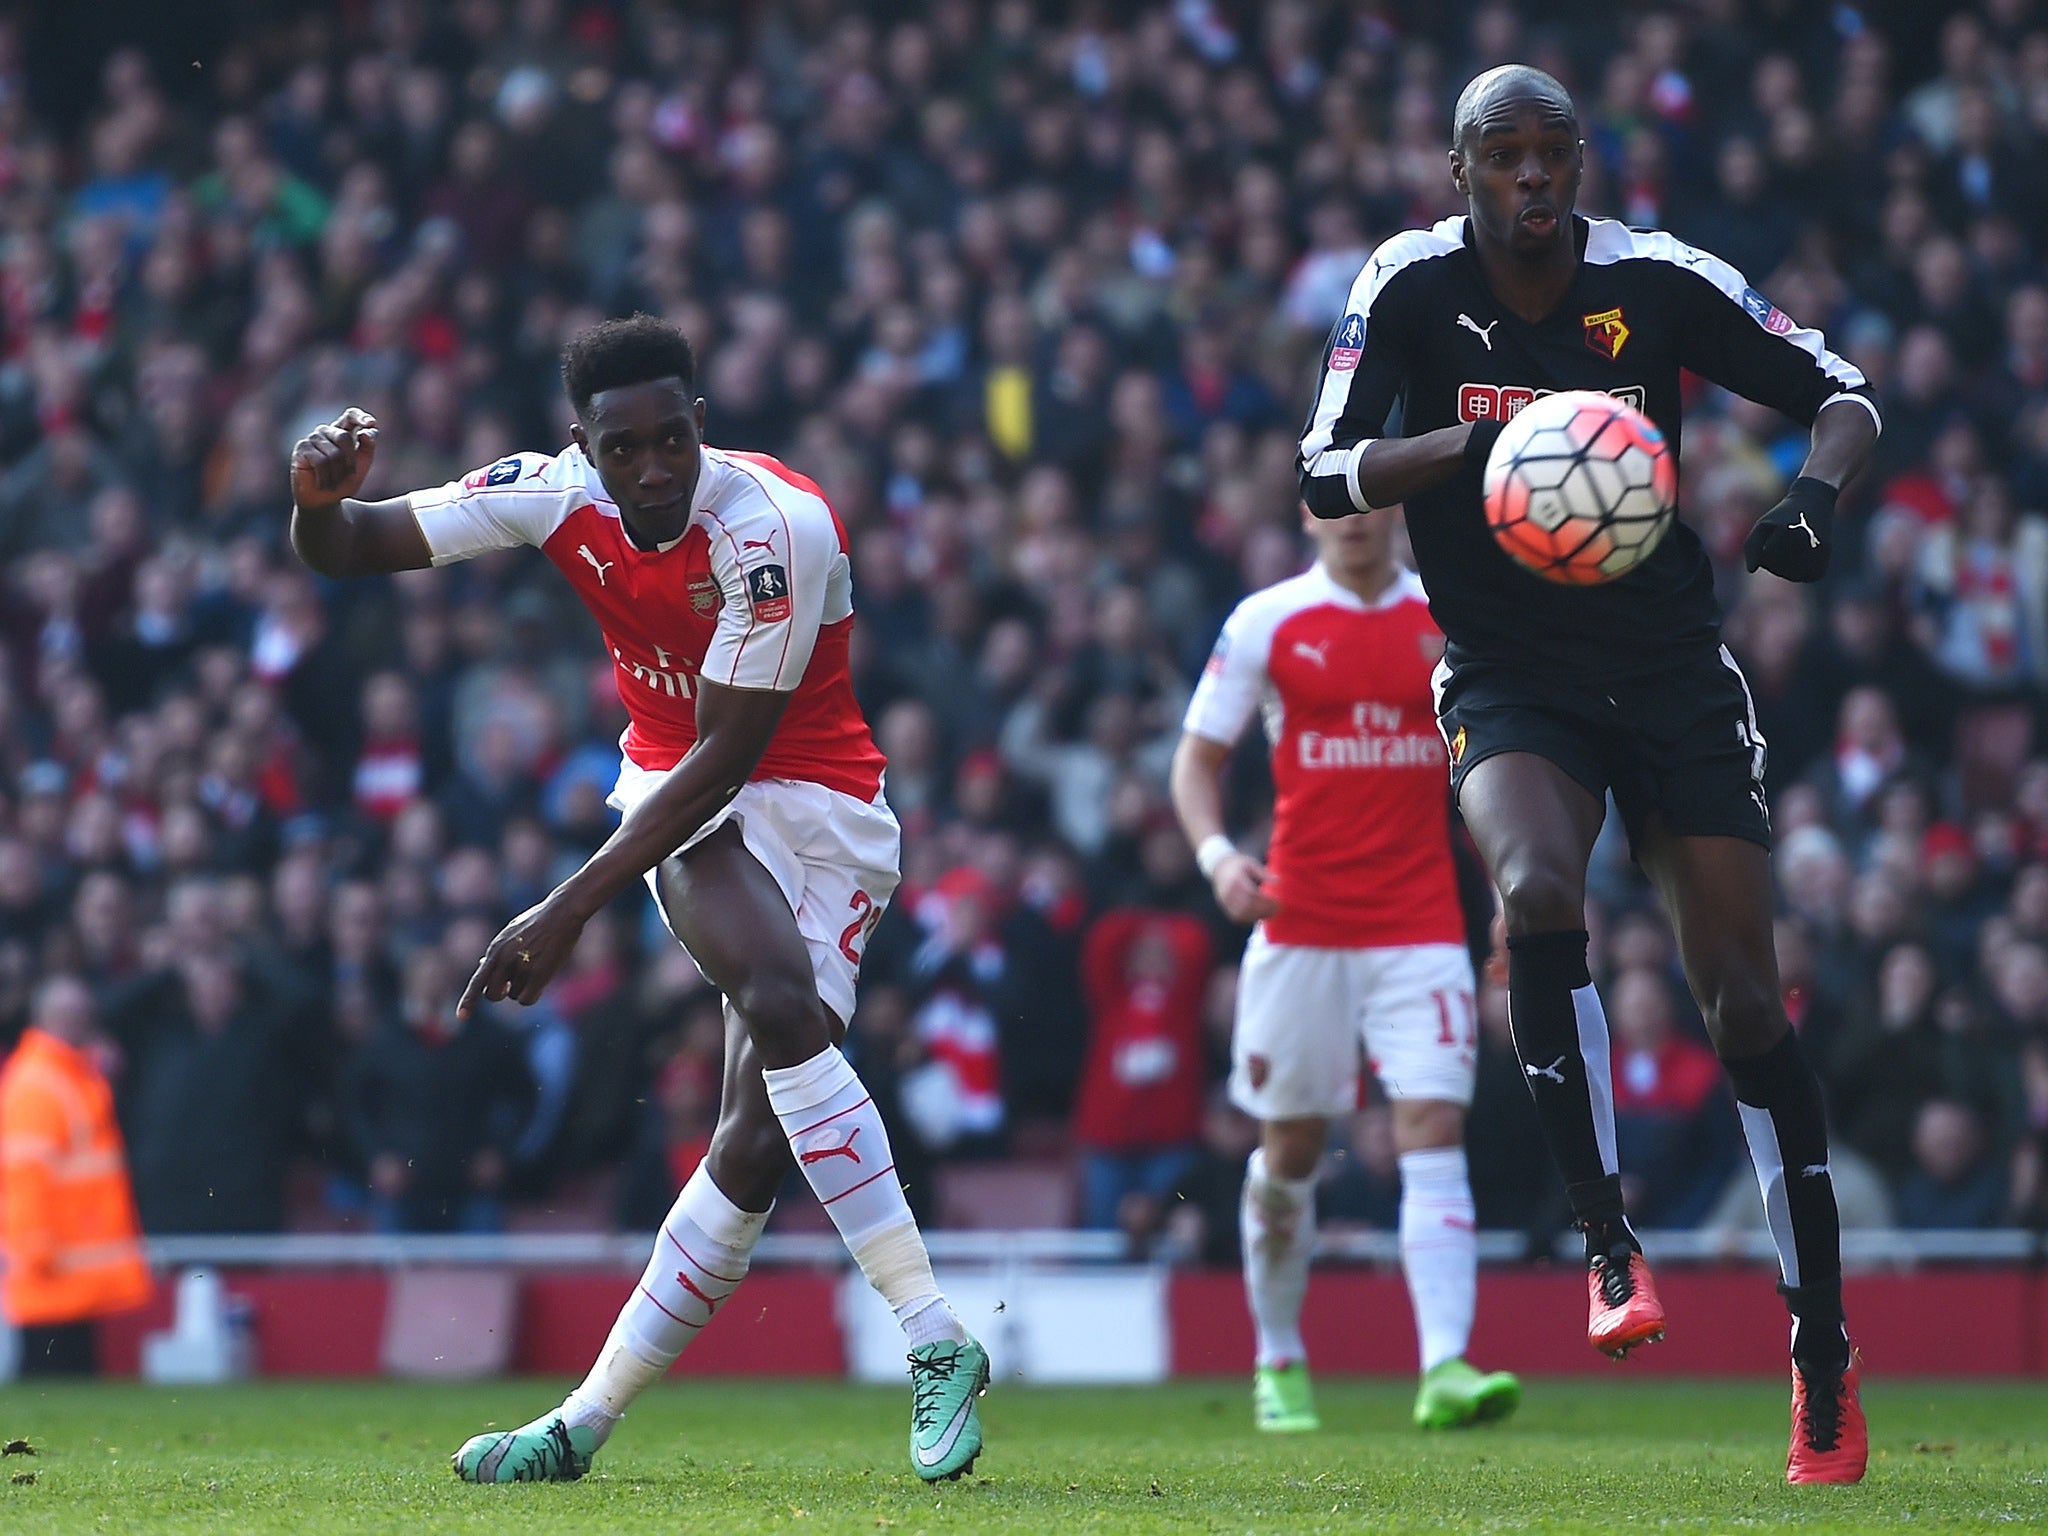 Danny Welbeck cannot find the target